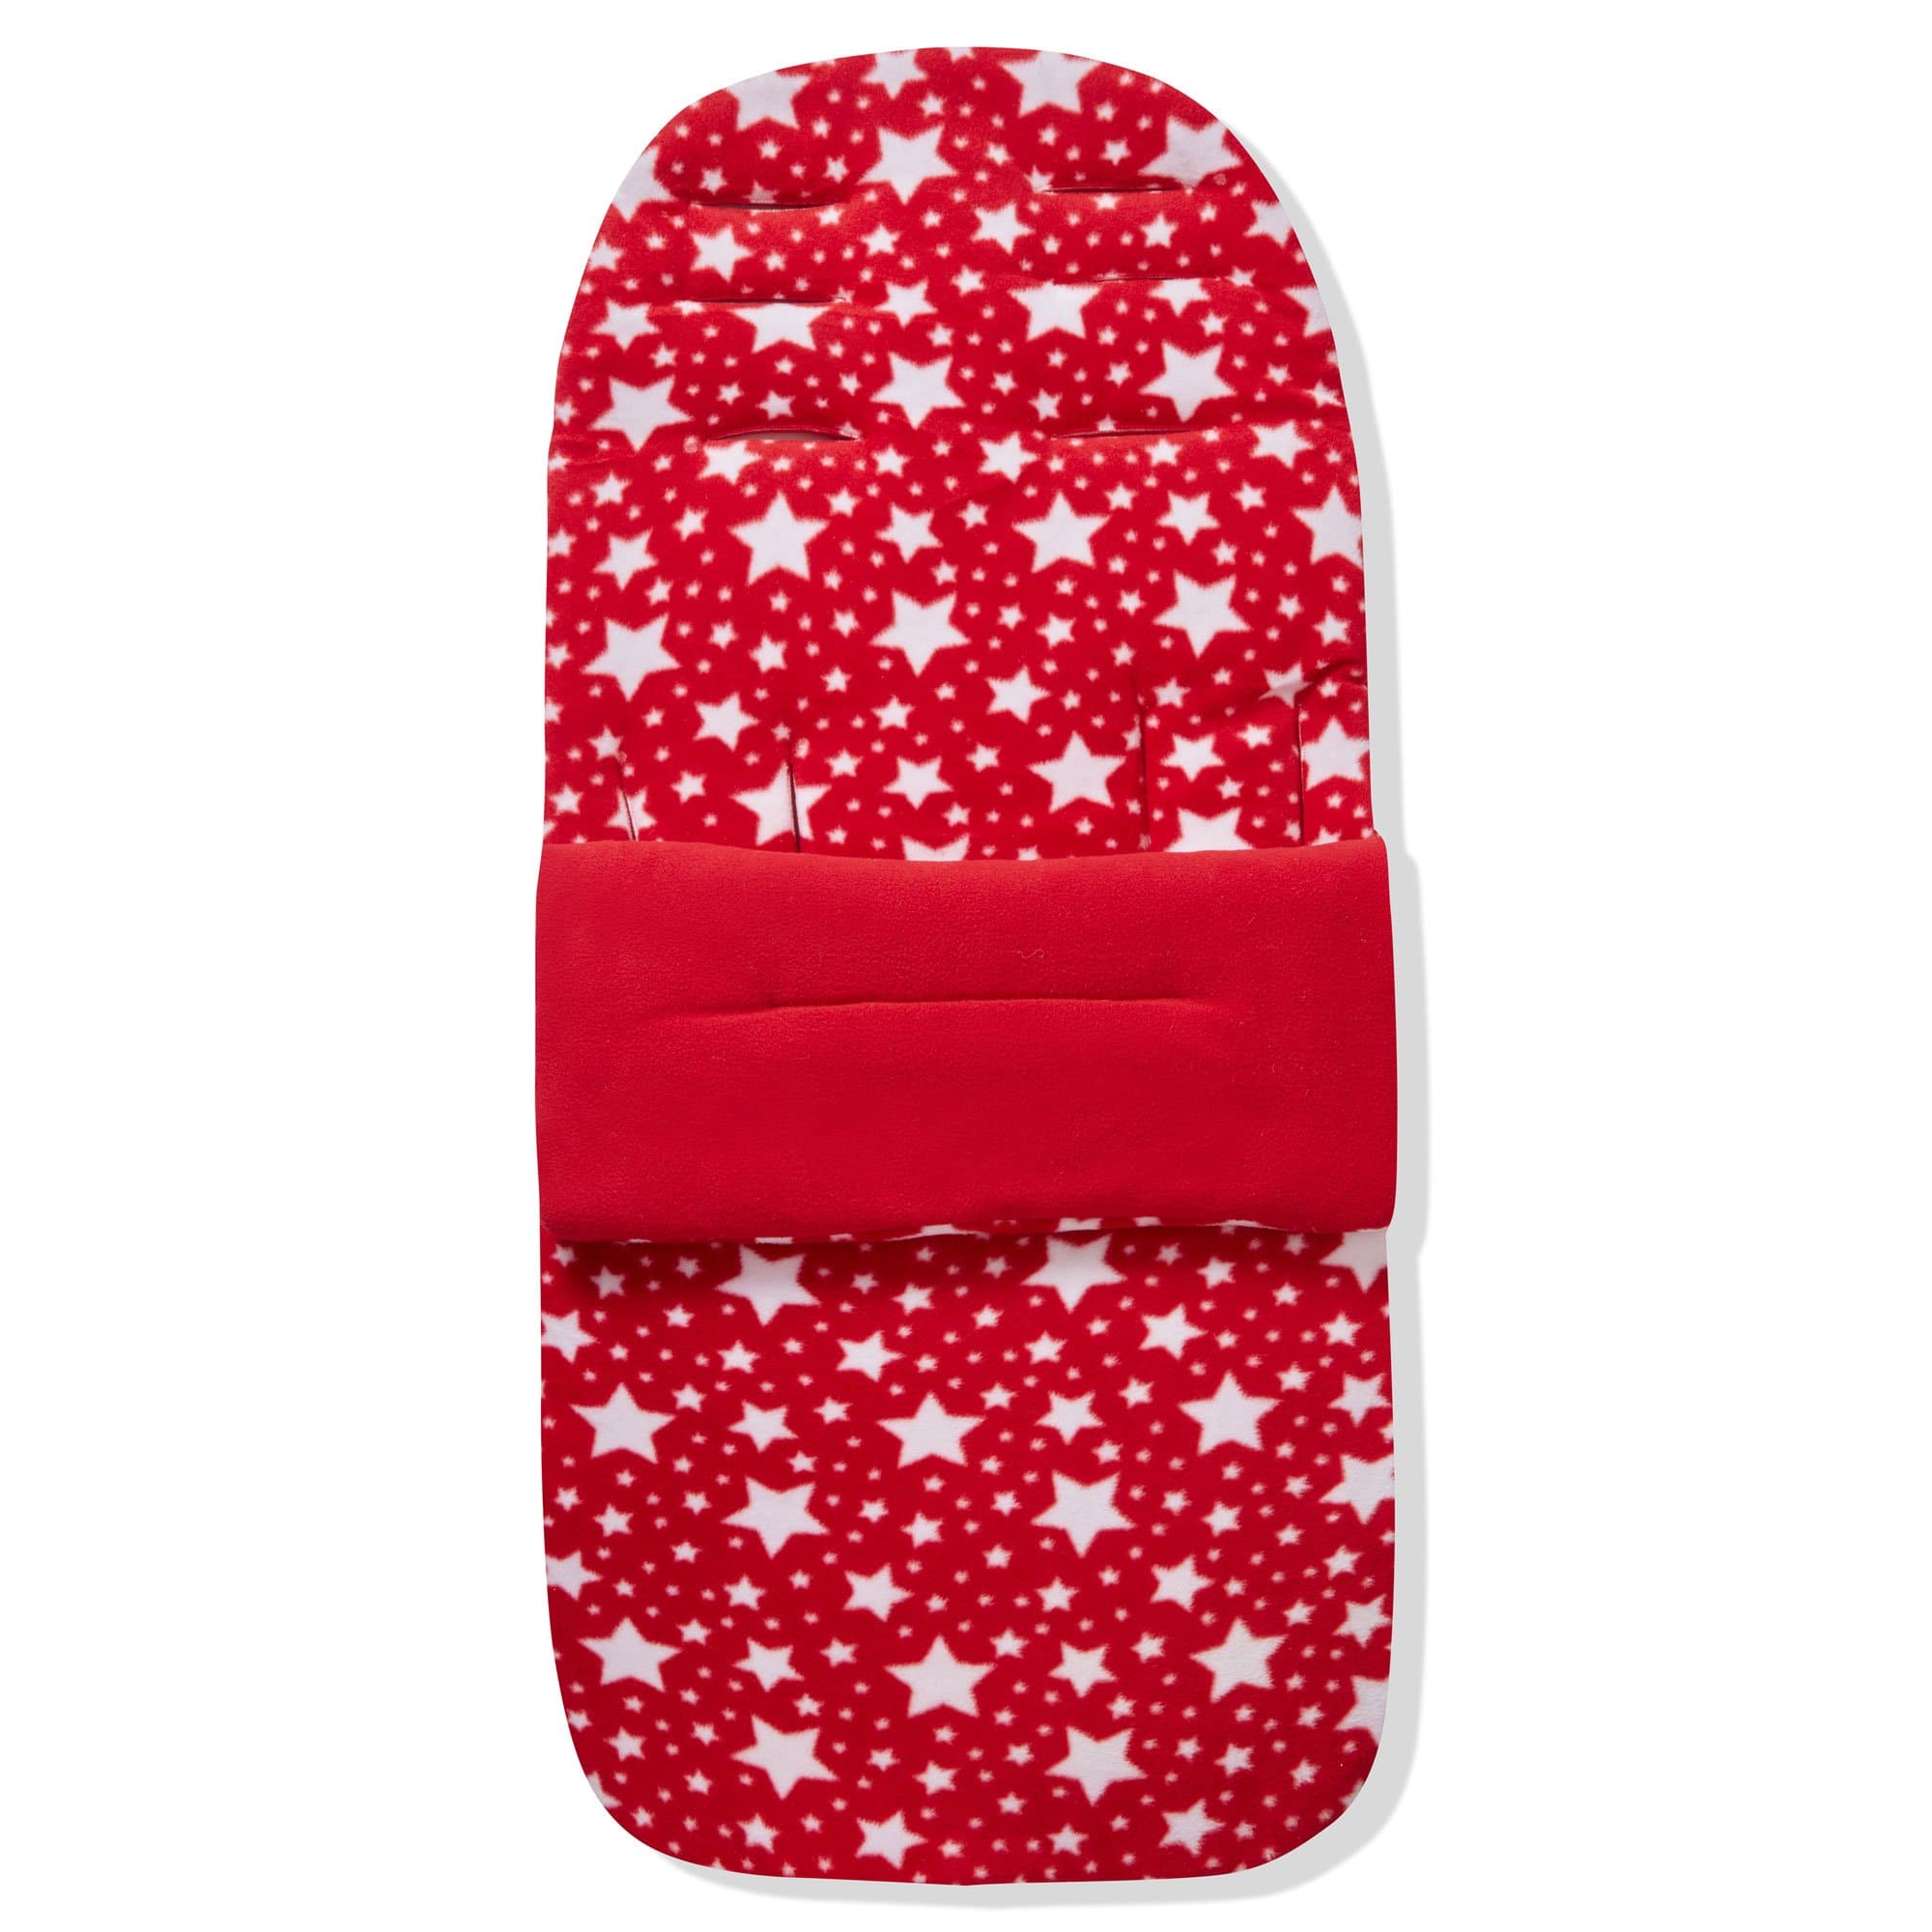 Fleece Footmuff / Cosy Toes Compatible with Excel - For Your Little One